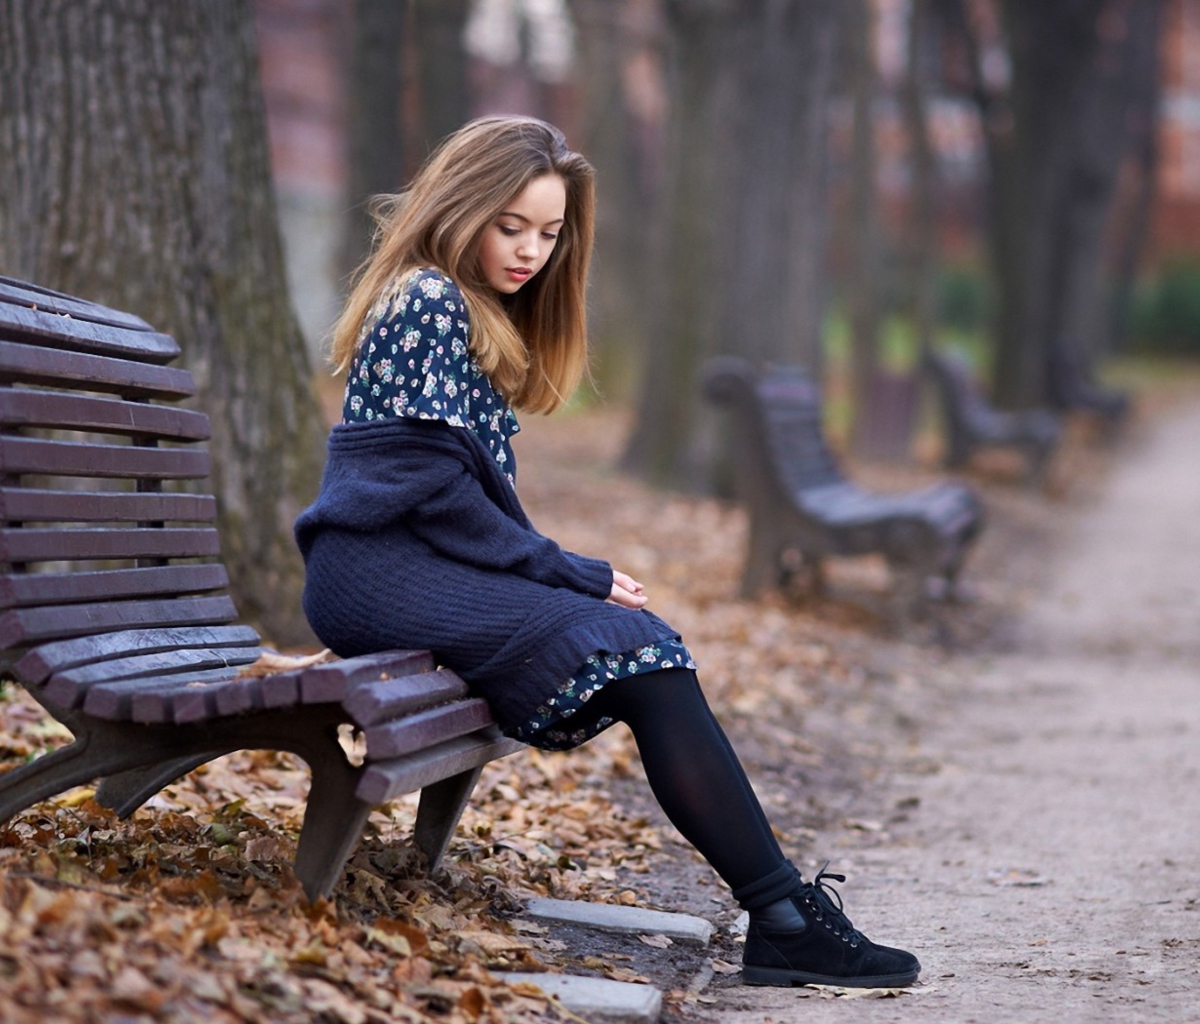 Beautiful Girl Sitting On Bench In Autumn Park wallpaper 1200x1024